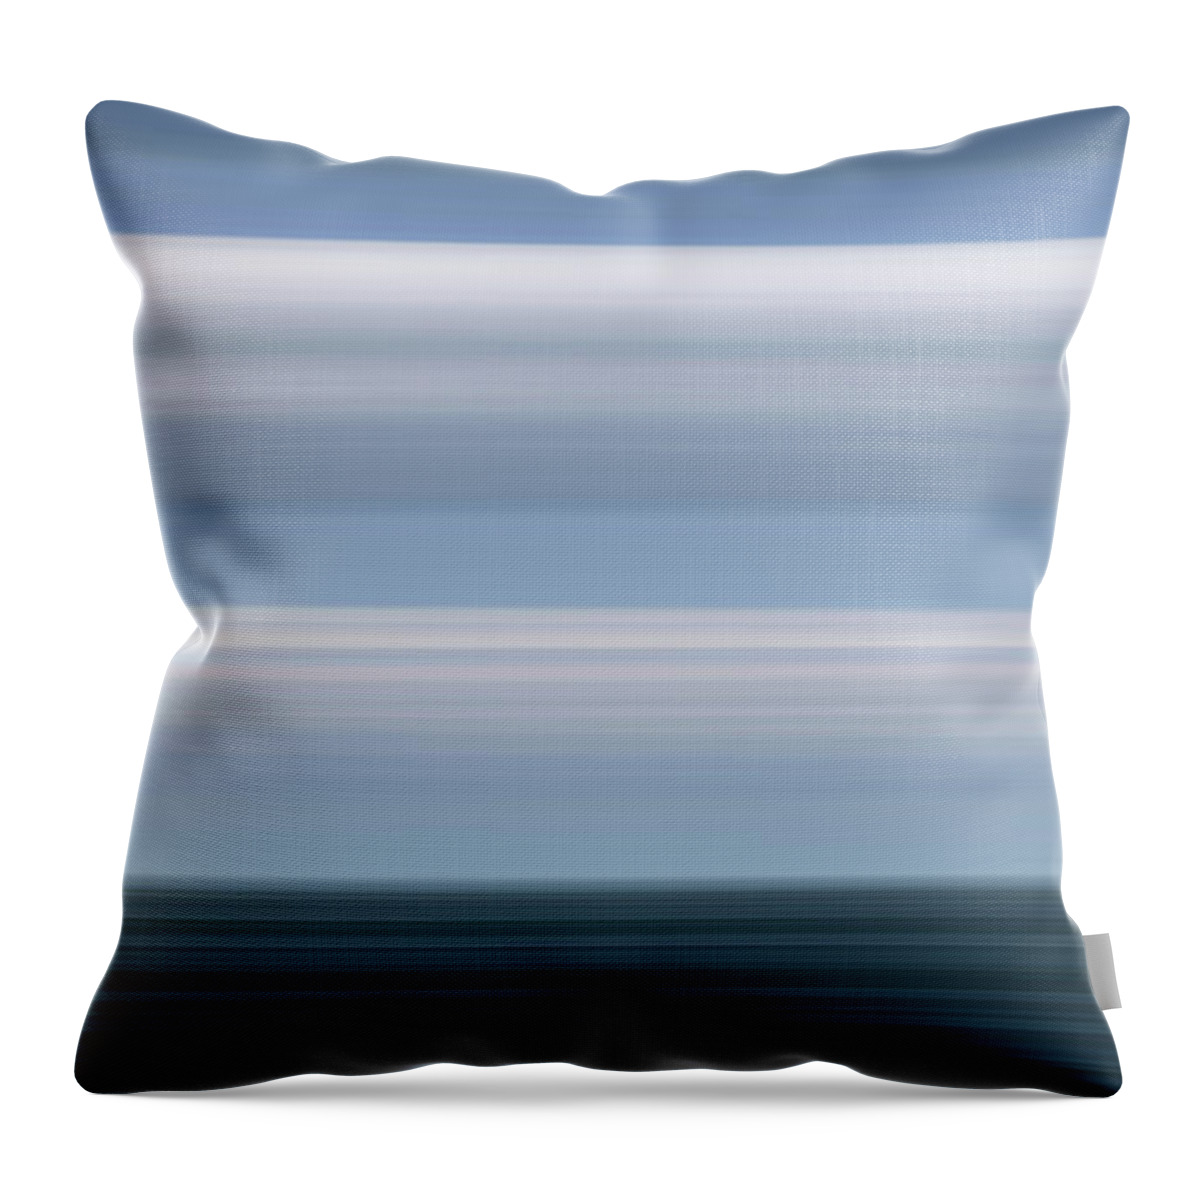 Sea Throw Pillow featuring the painting On Sea by Gianni Sarcone